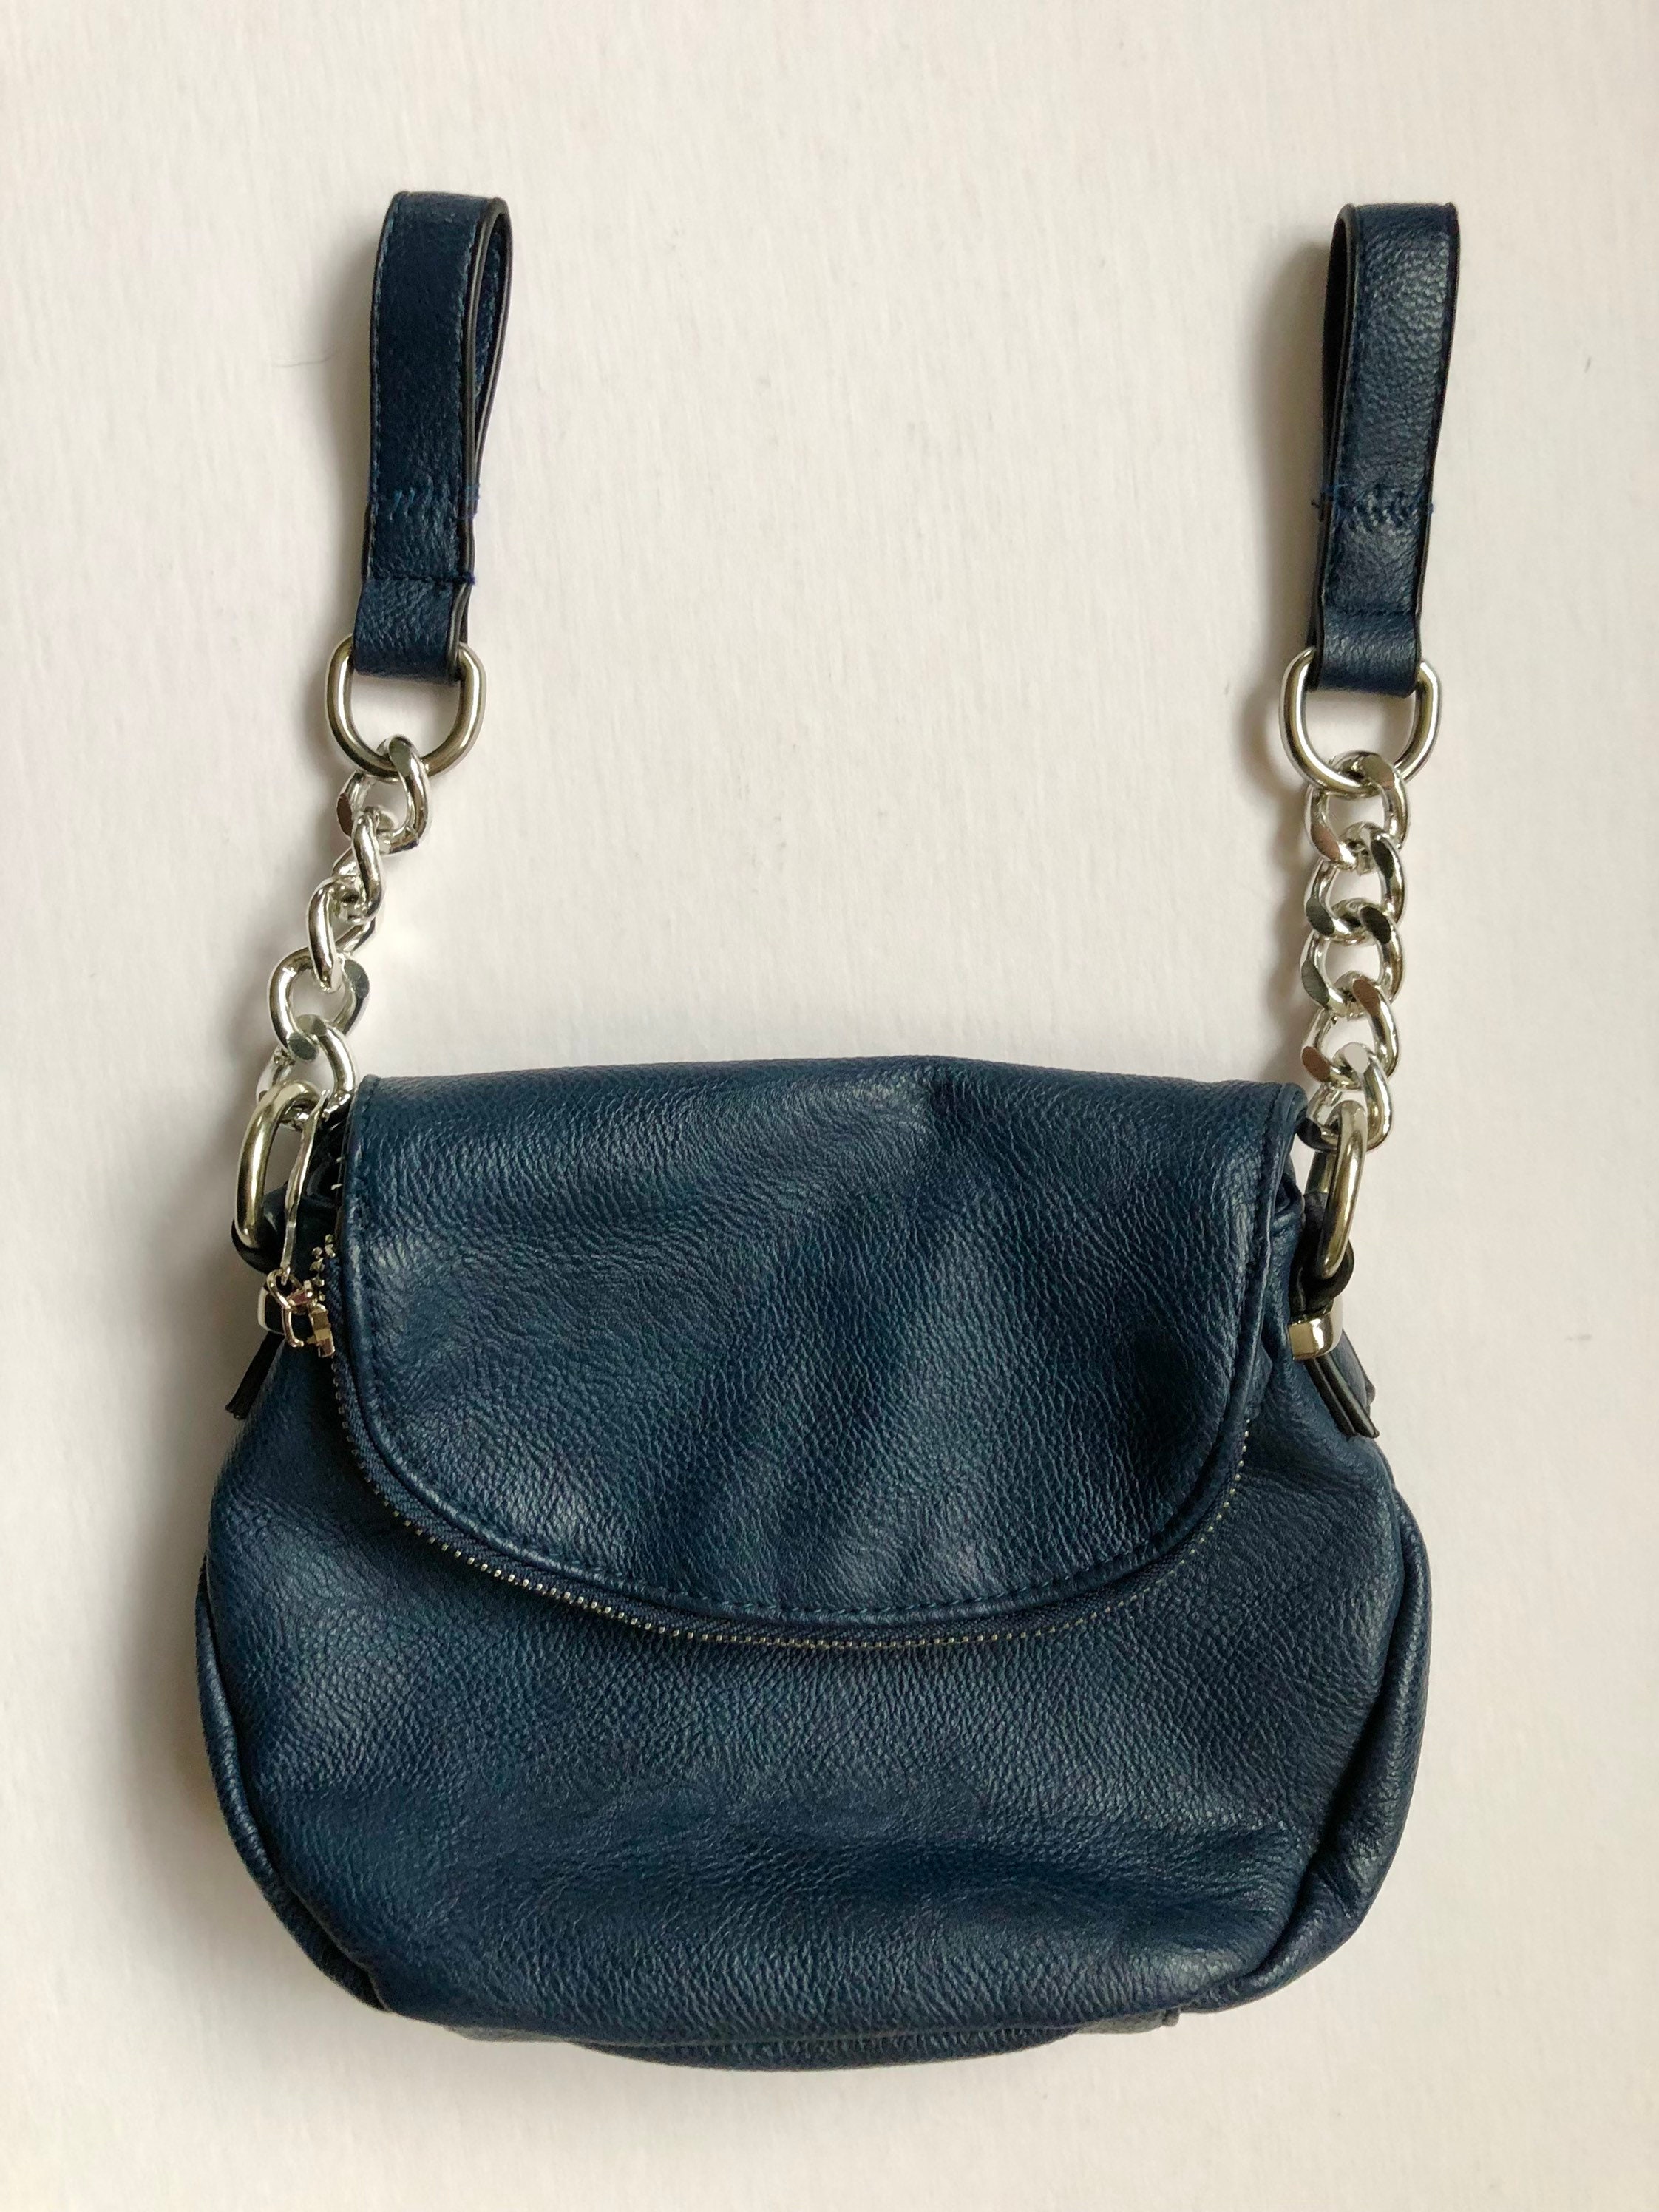 Moda Luxe Brooks Crossbody Bag - I also saw this in brown and navy